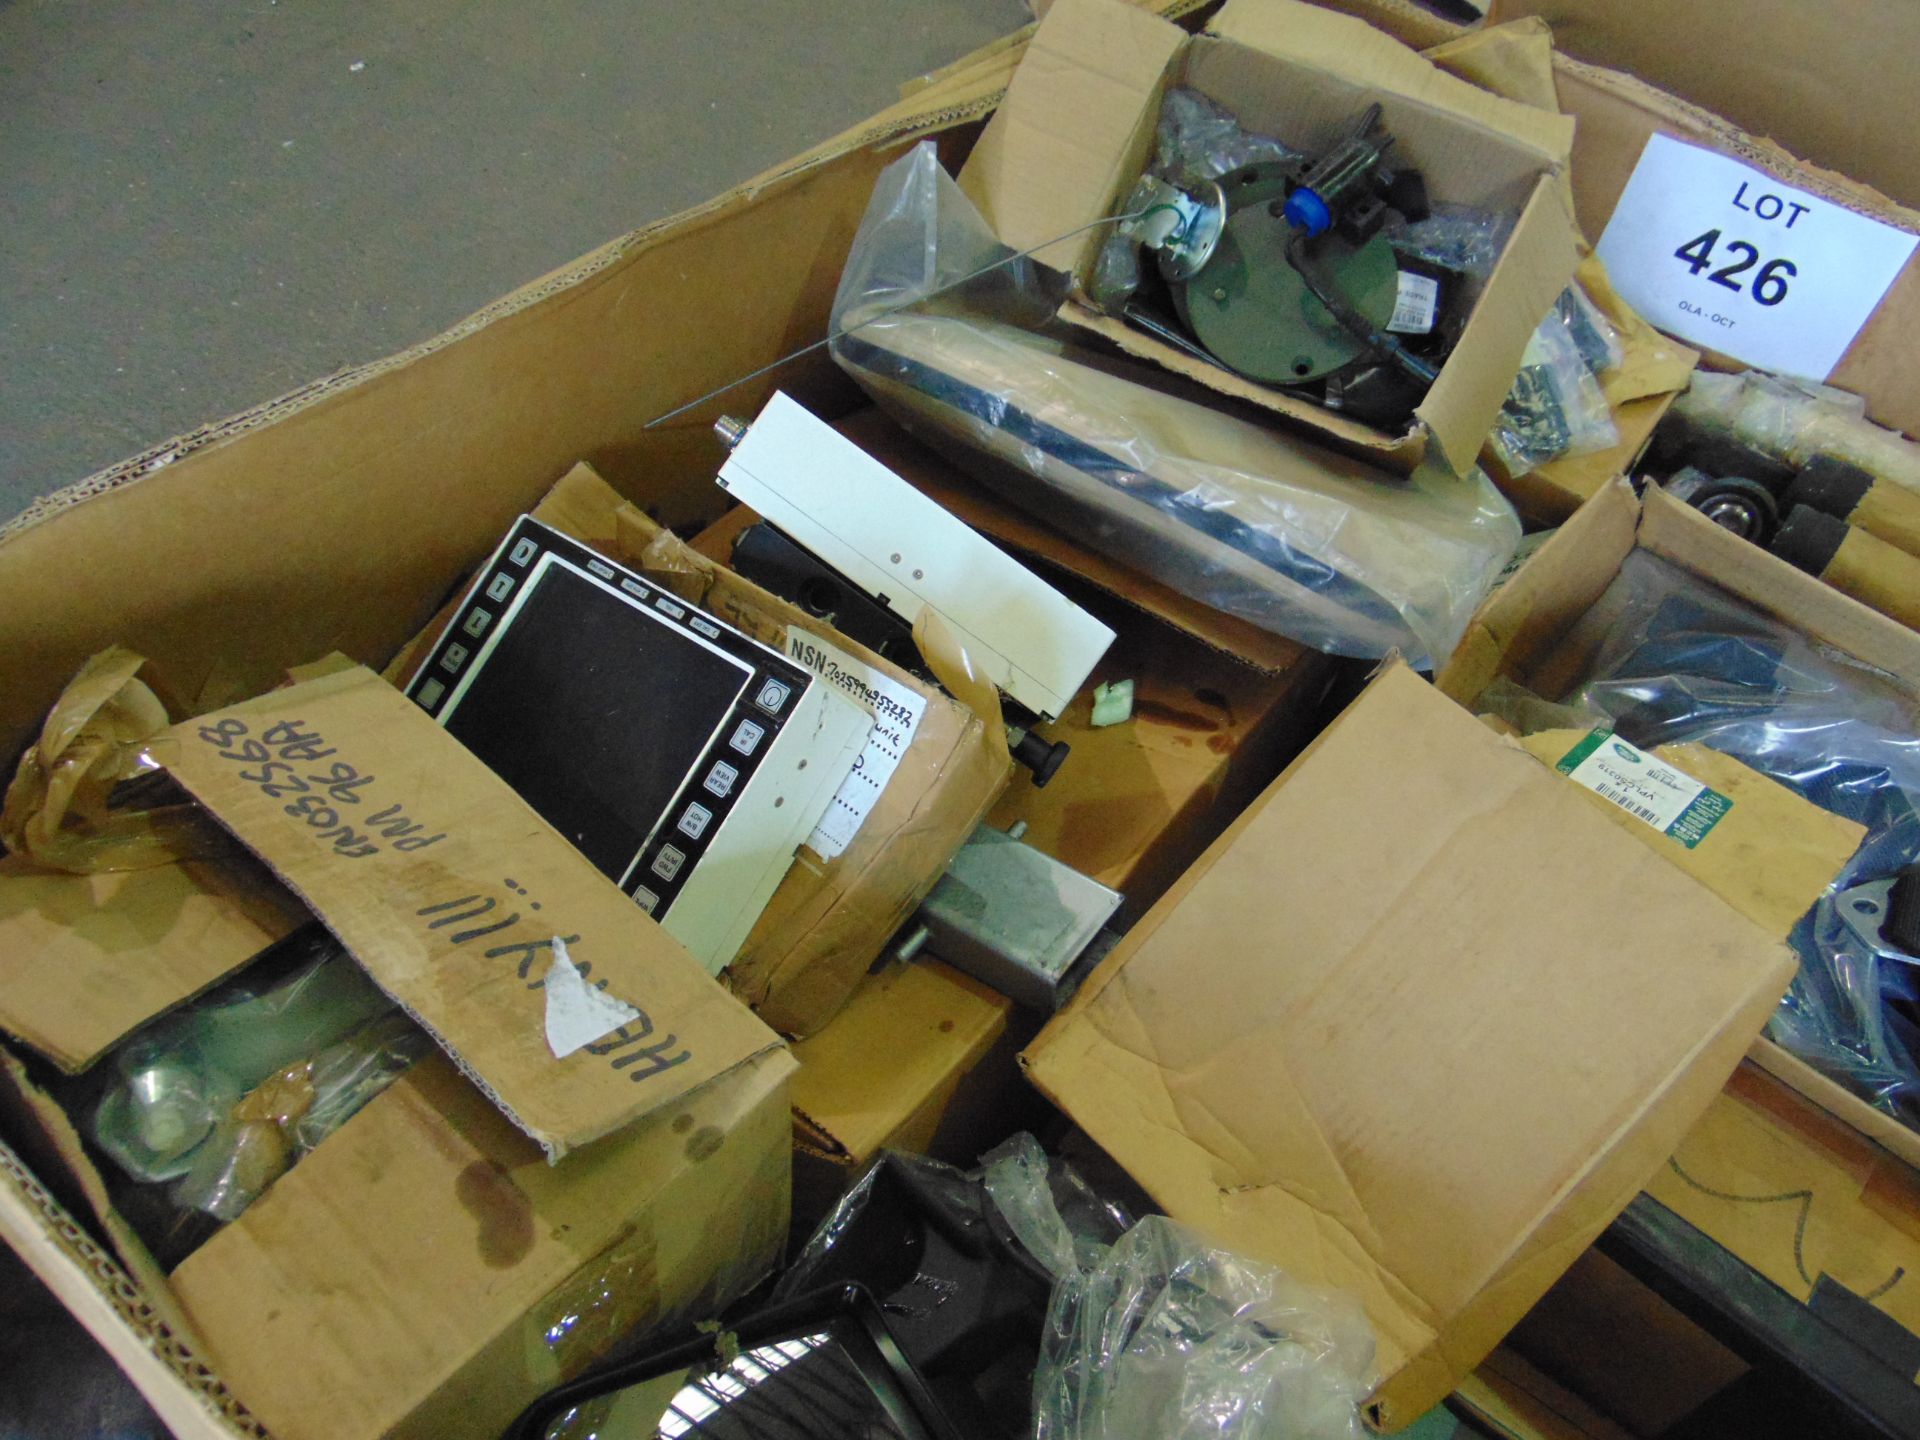 1 x Triwall box of Unsorted Vehicle FV spares as shown